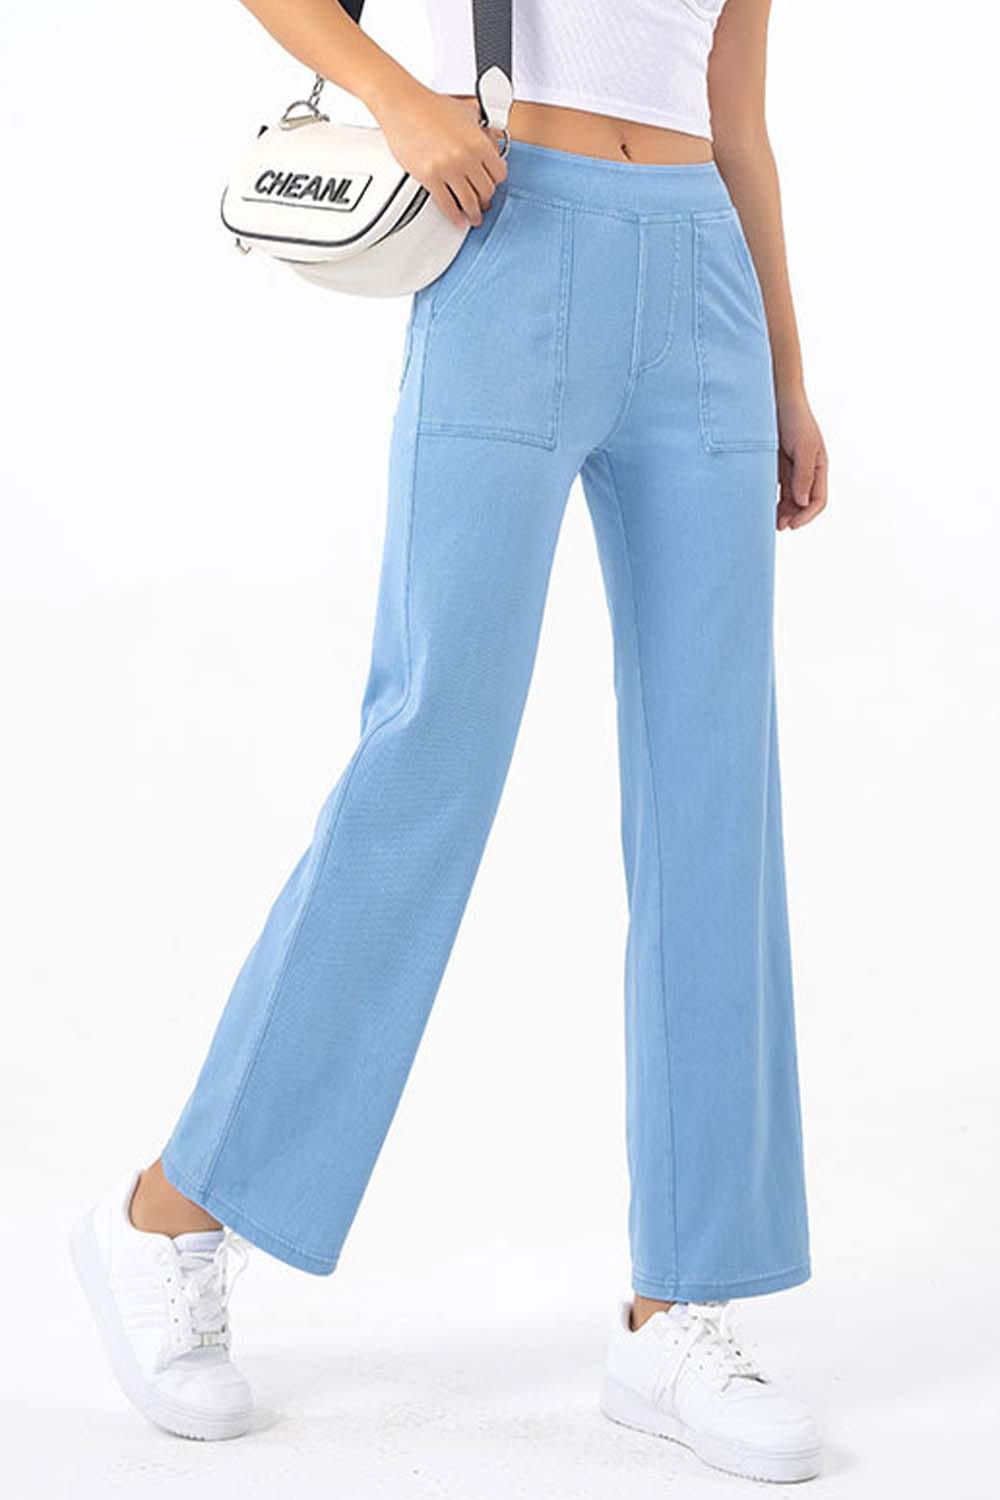 Trendsi Jeans Pocketed Long Jeans